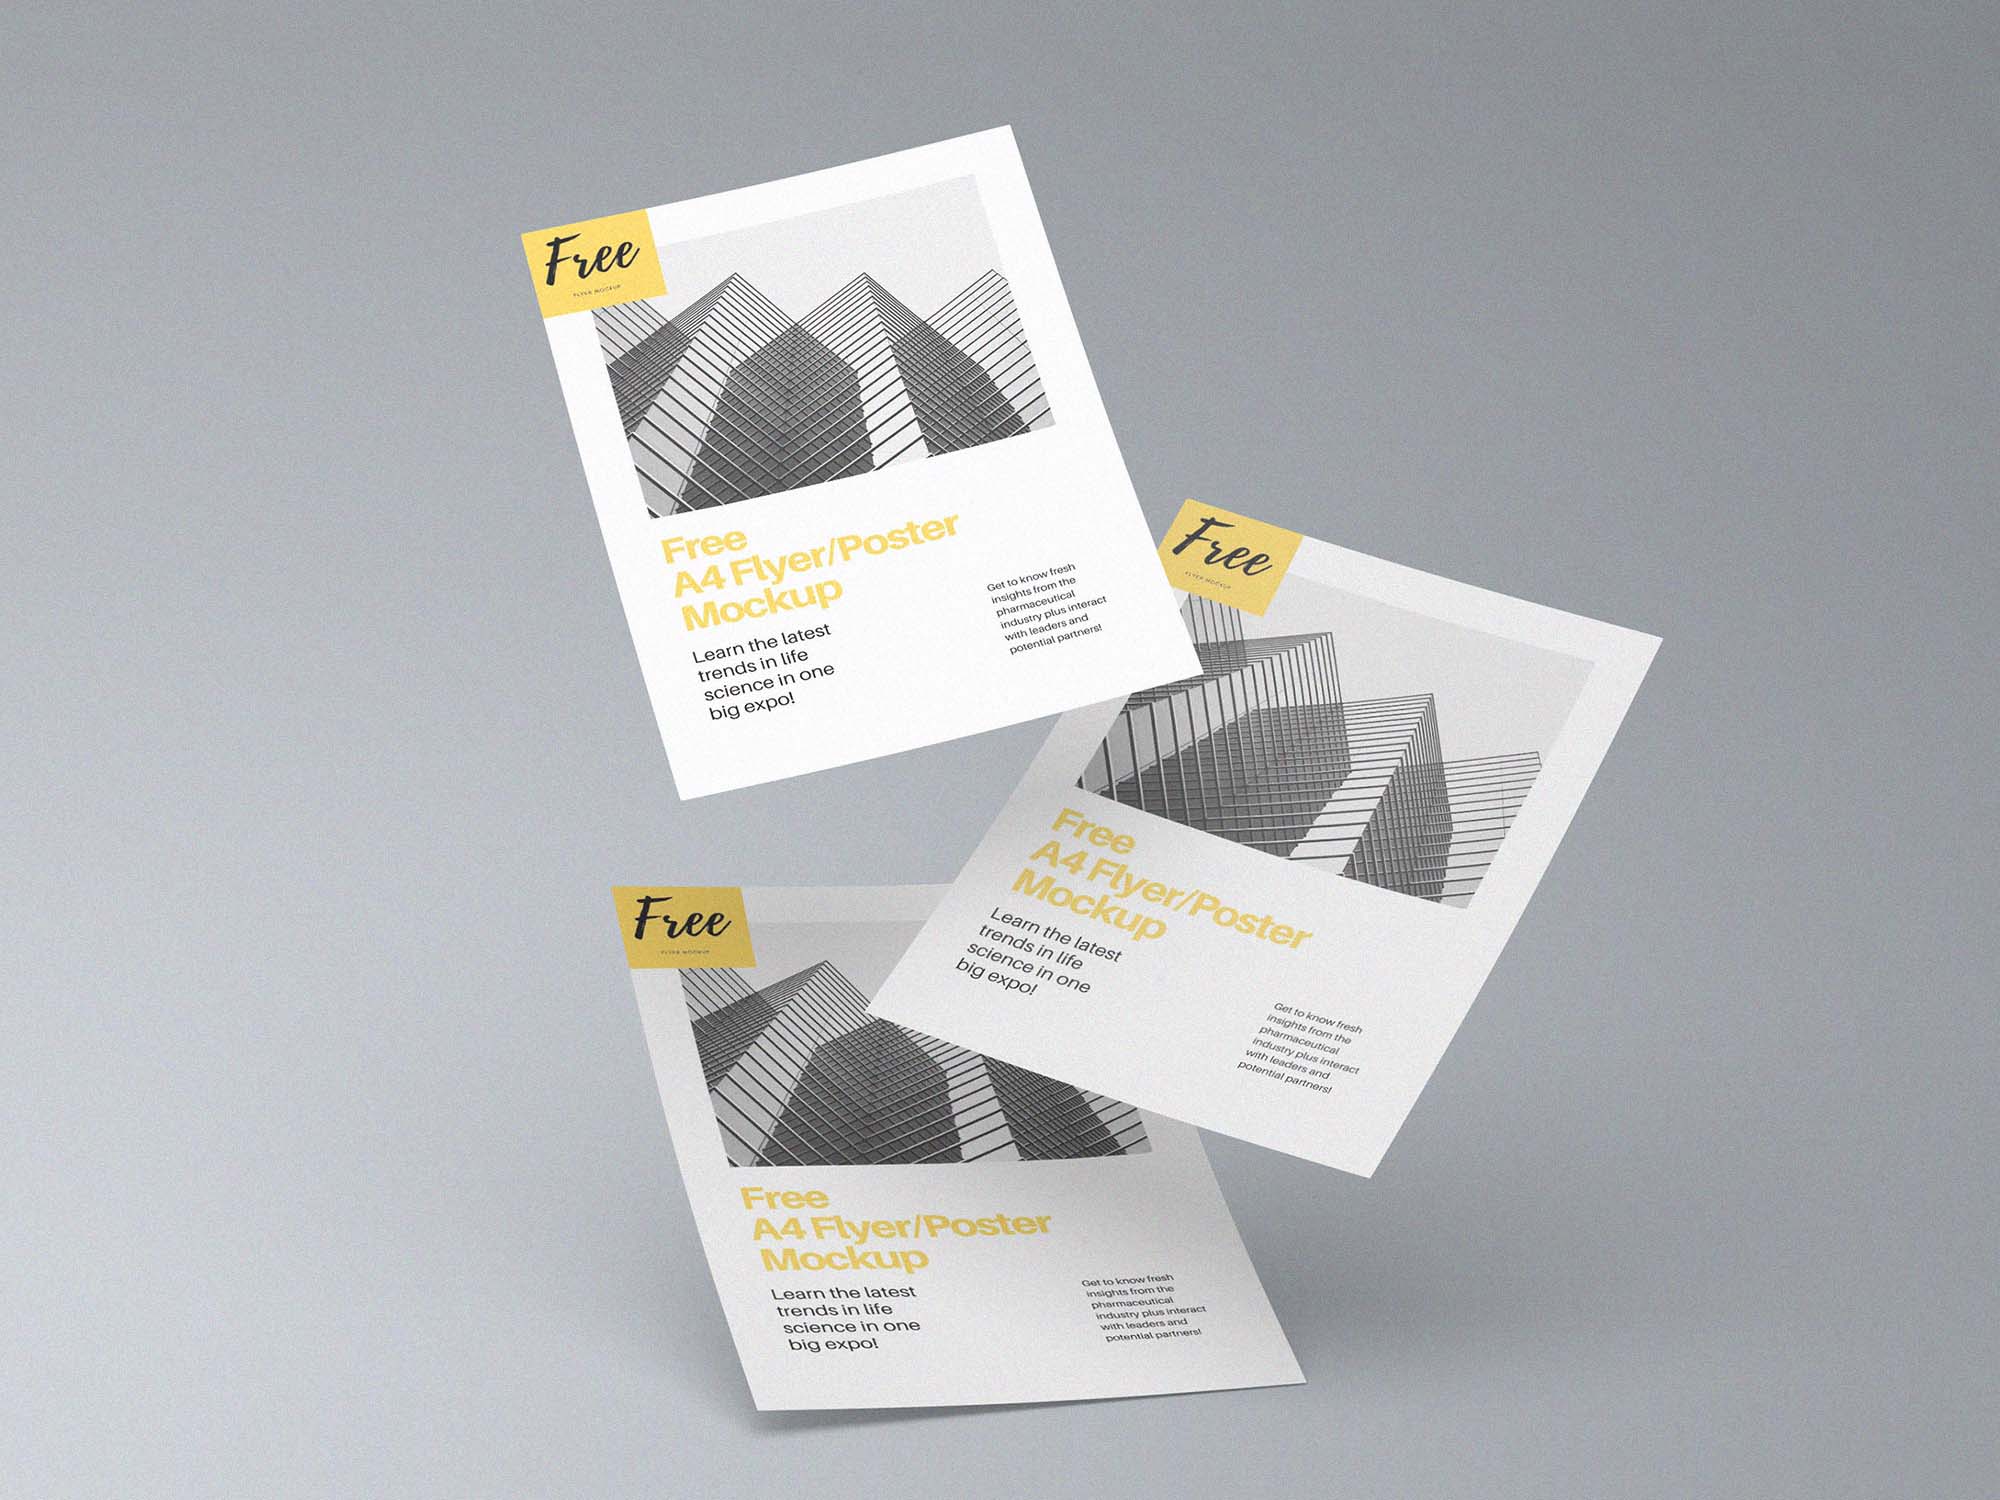 Free A4 Flyer and Poster Mockup 